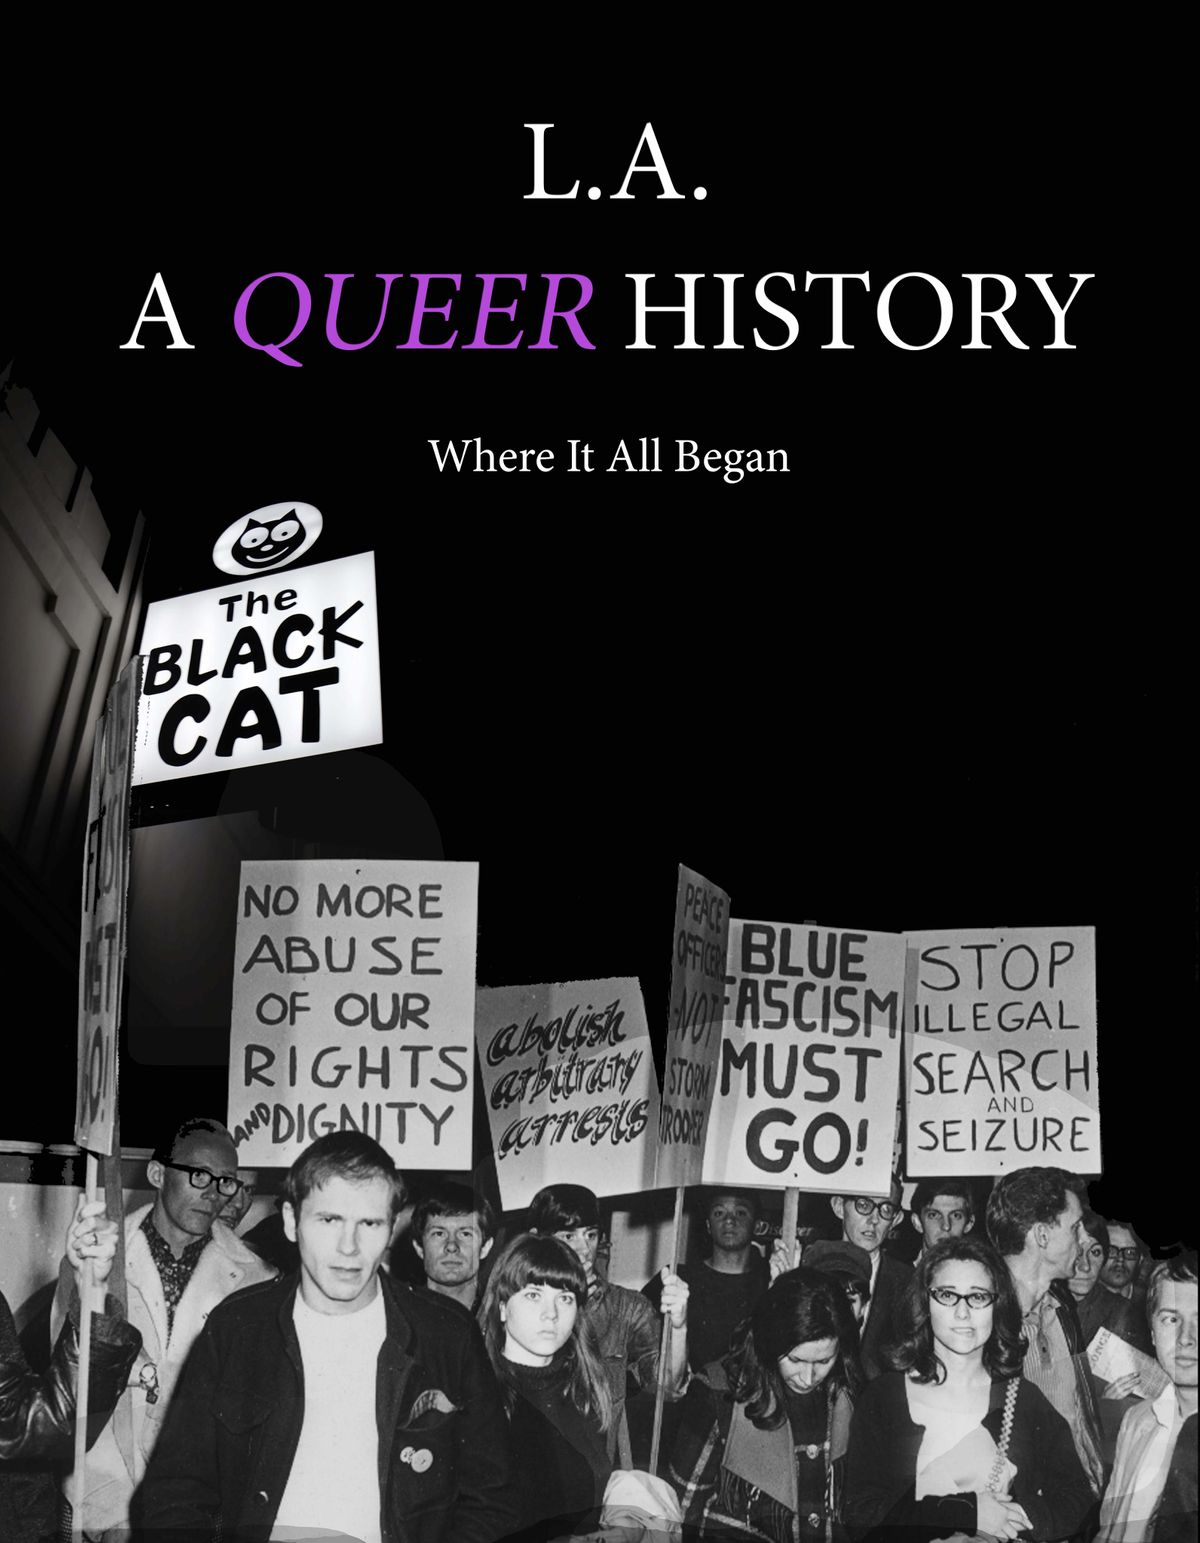 L.A. A QUEER HISTORY - Northwest Premiere